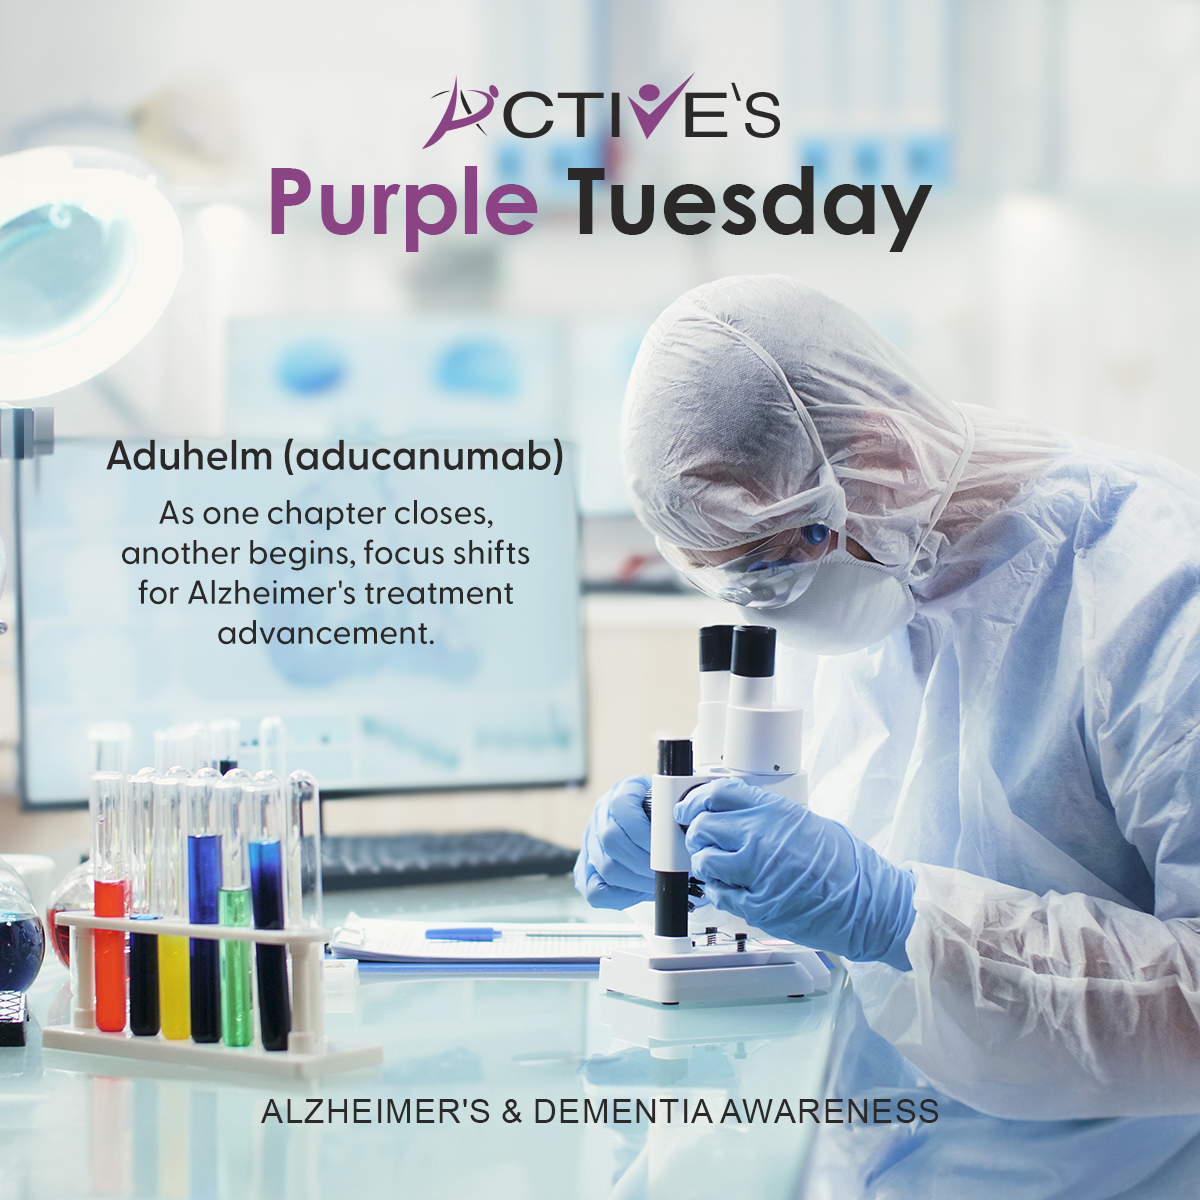 Aduhelm (aducanumab) will be phased out to pave the way for Leqembi (Lecanemab-irmb), Biogen's collaboration efforts with Eisai holds a promise in addressing various aspects of Alzheimer's disease, offering hope for patients and caregivers alike. #ActivesPurpleTuesday #EndALZ 💜